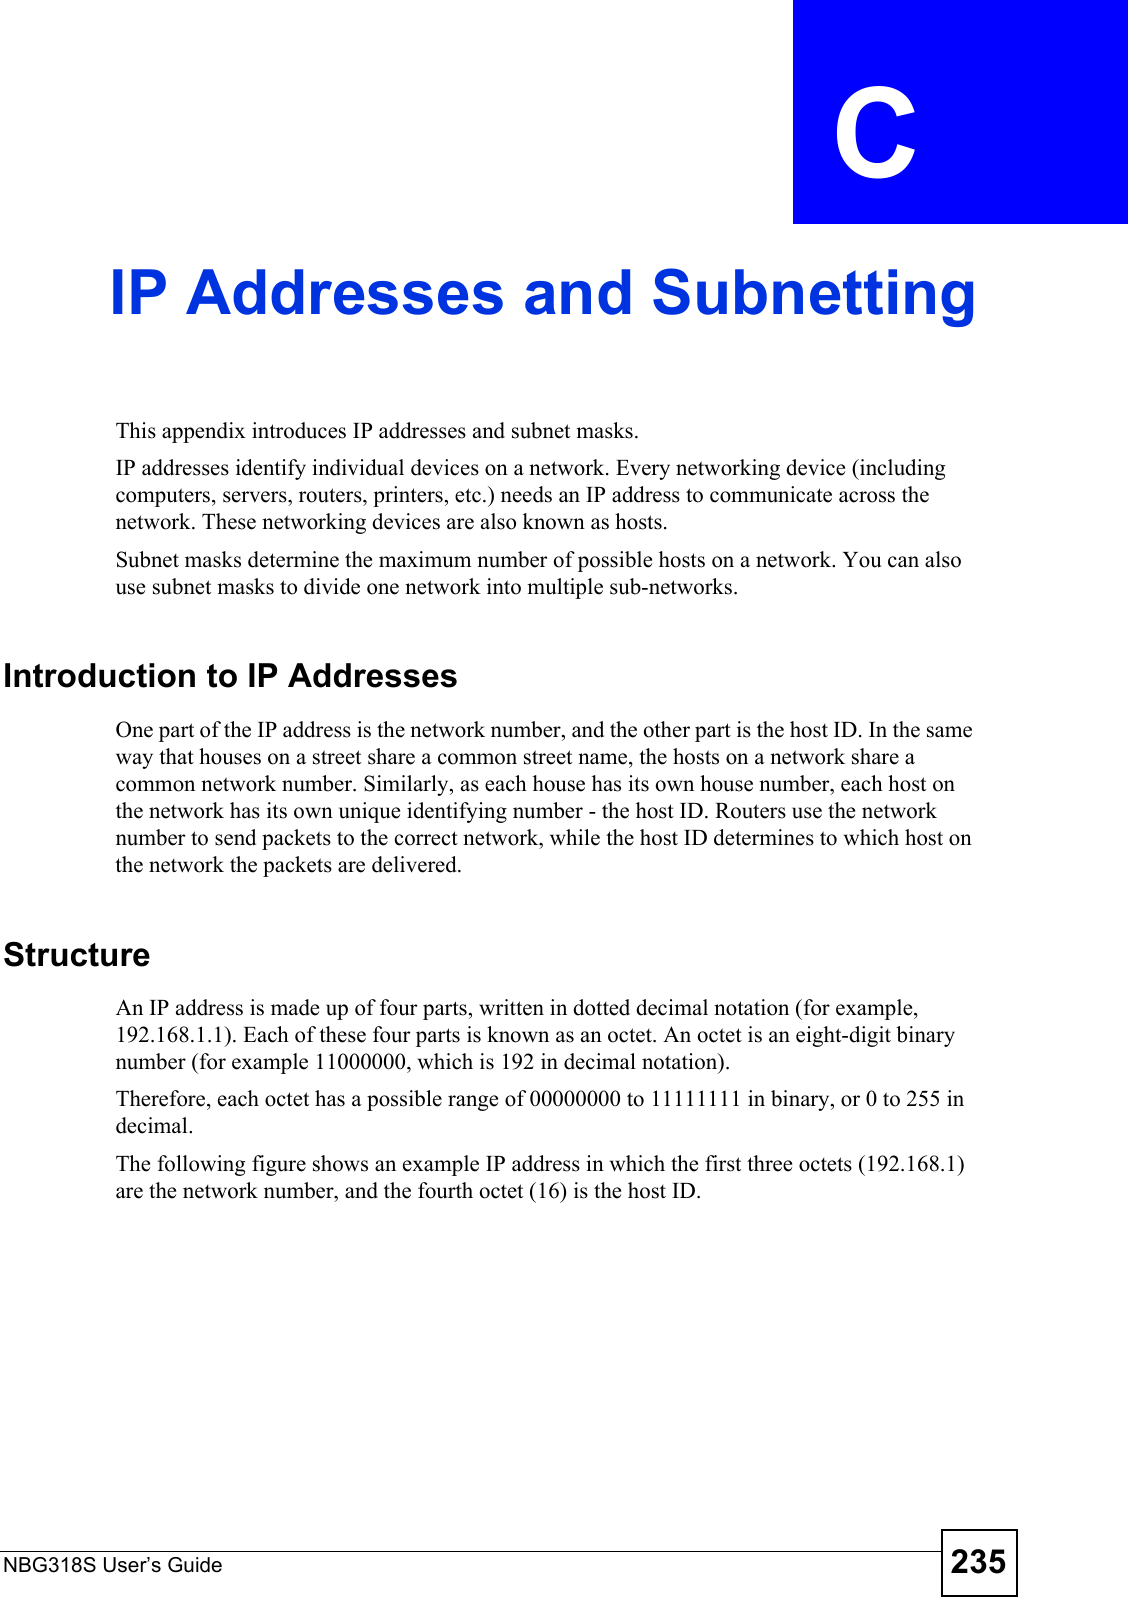 NBG318S User’s Guide 235APPENDIX  C IP Addresses and SubnettingThis appendix introduces IP addresses and subnet masks. IP addresses identify individual devices on a network. Every networking device (including computers, servers, routers, printers, etc.) needs an IP address to communicate across the network. These networking devices are also known as hosts.Subnet masks determine the maximum number of possible hosts on a network. You can also use subnet masks to divide one network into multiple sub-networks.Introduction to IP AddressesOne part of the IP address is the network number, and the other part is the host ID. In the same way that houses on a street share a common street name, the hosts on a network share a common network number. Similarly, as each house has its own house number, each host on the network has its own unique identifying number - the host ID. Routers use the network number to send packets to the correct network, while the host ID determines to which host on the network the packets are delivered.StructureAn IP address is made up of four parts, written in dotted decimal notation (for example, 192.168.1.1). Each of these four parts is known as an octet. An octet is an eight-digit binary number (for example 11000000, which is 192 in decimal notation). Therefore, each octet has a possible range of 00000000 to 11111111 in binary, or 0 to 255 in decimal.The following figure shows an example IP address in which the first three octets (192.168.1) are the network number, and the fourth octet (16) is the host ID.